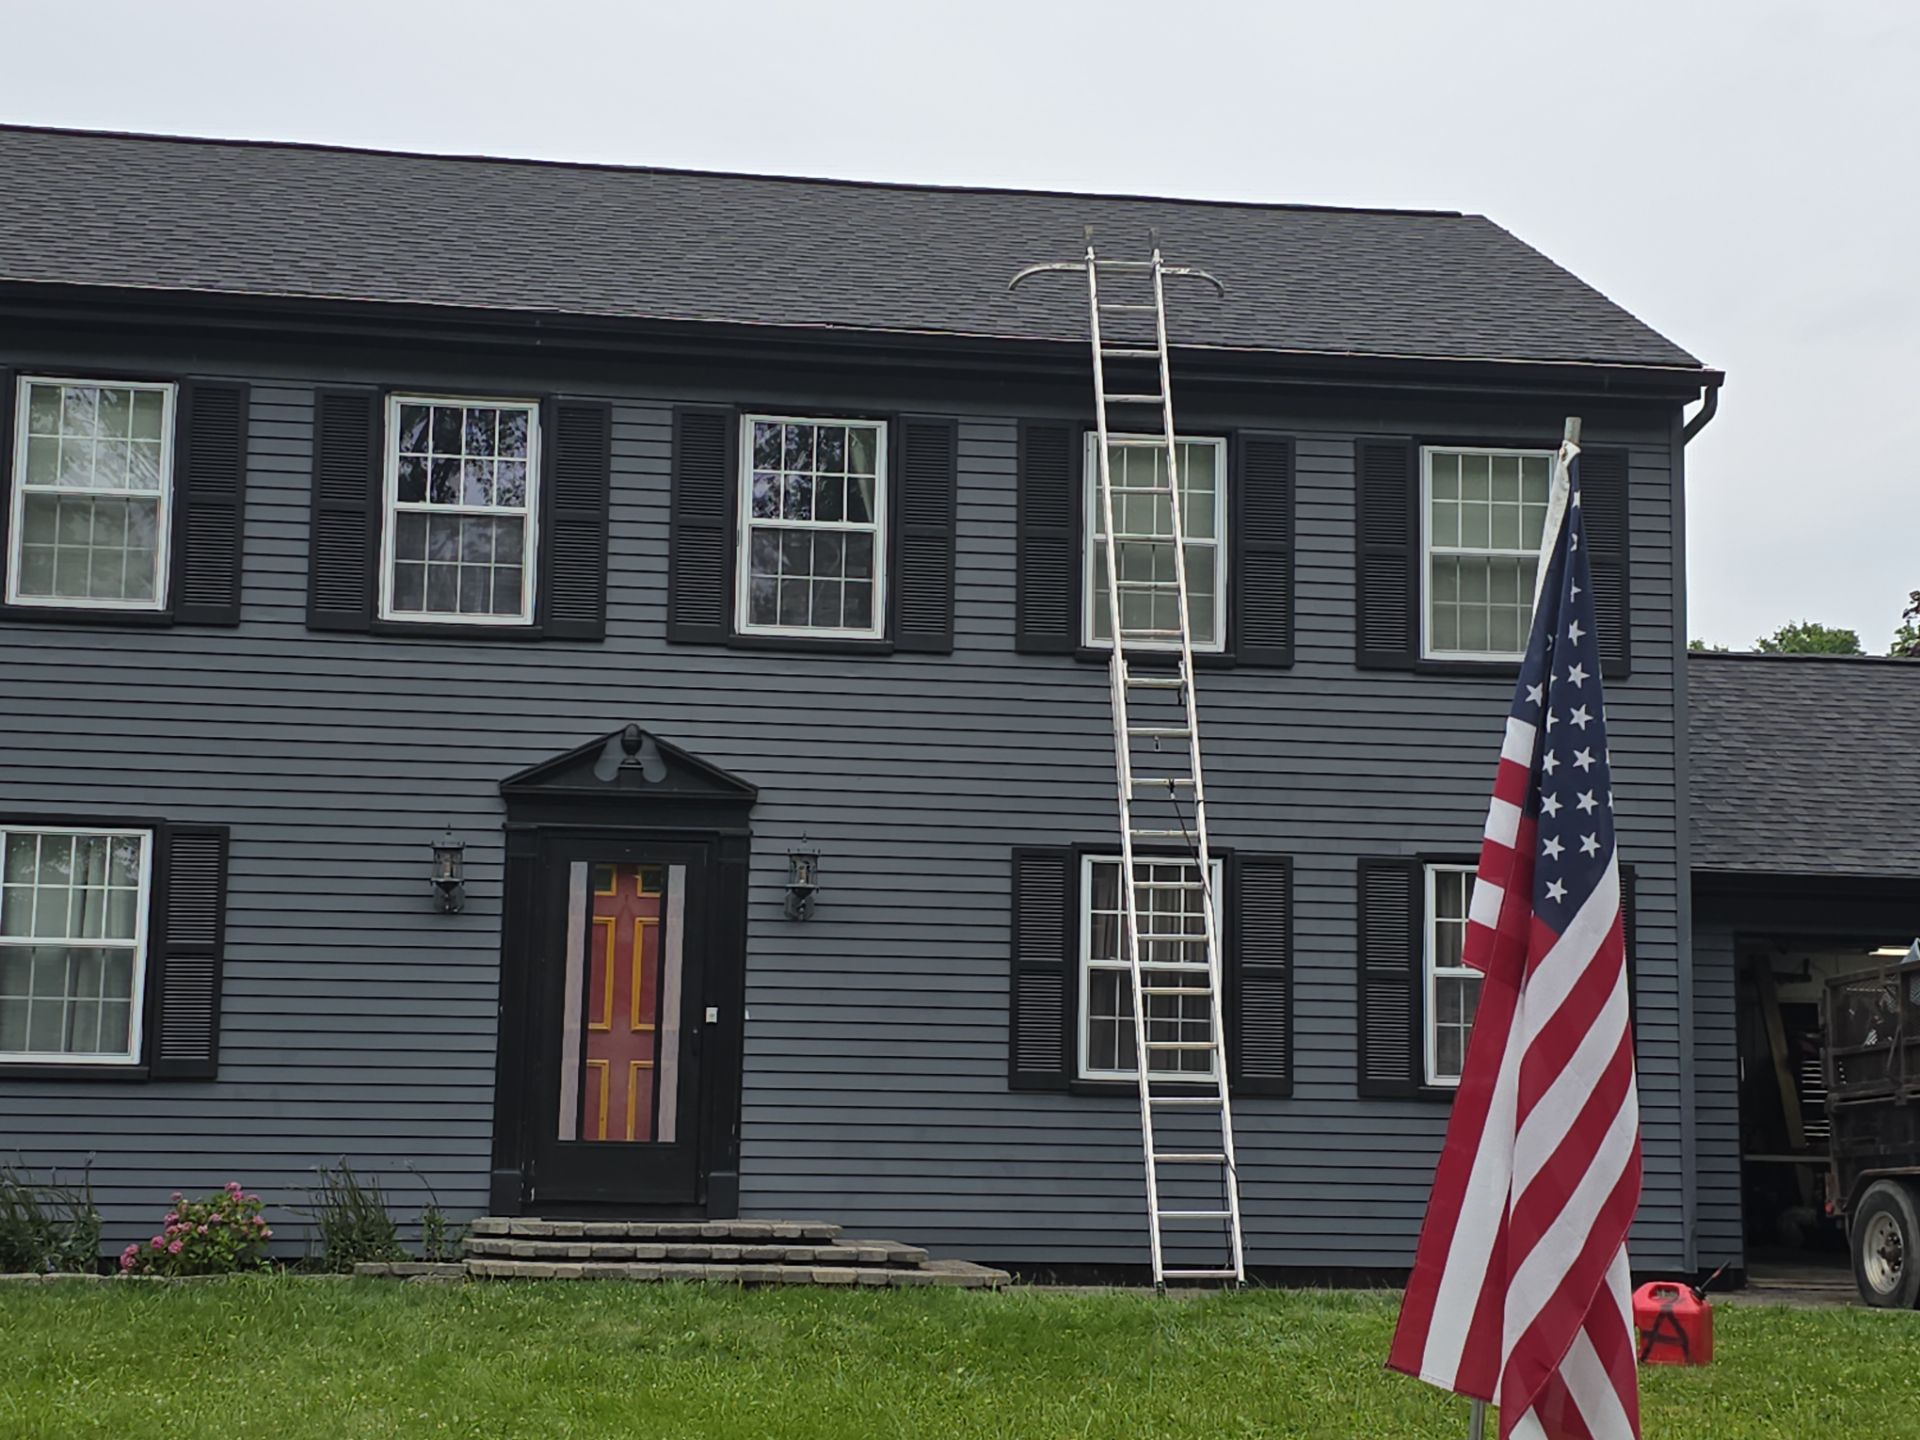 A two-story gray house with black shutters is shown. There is a ladder leaning against the roof on the right side. The U.S. flag is in the foreground on the right.